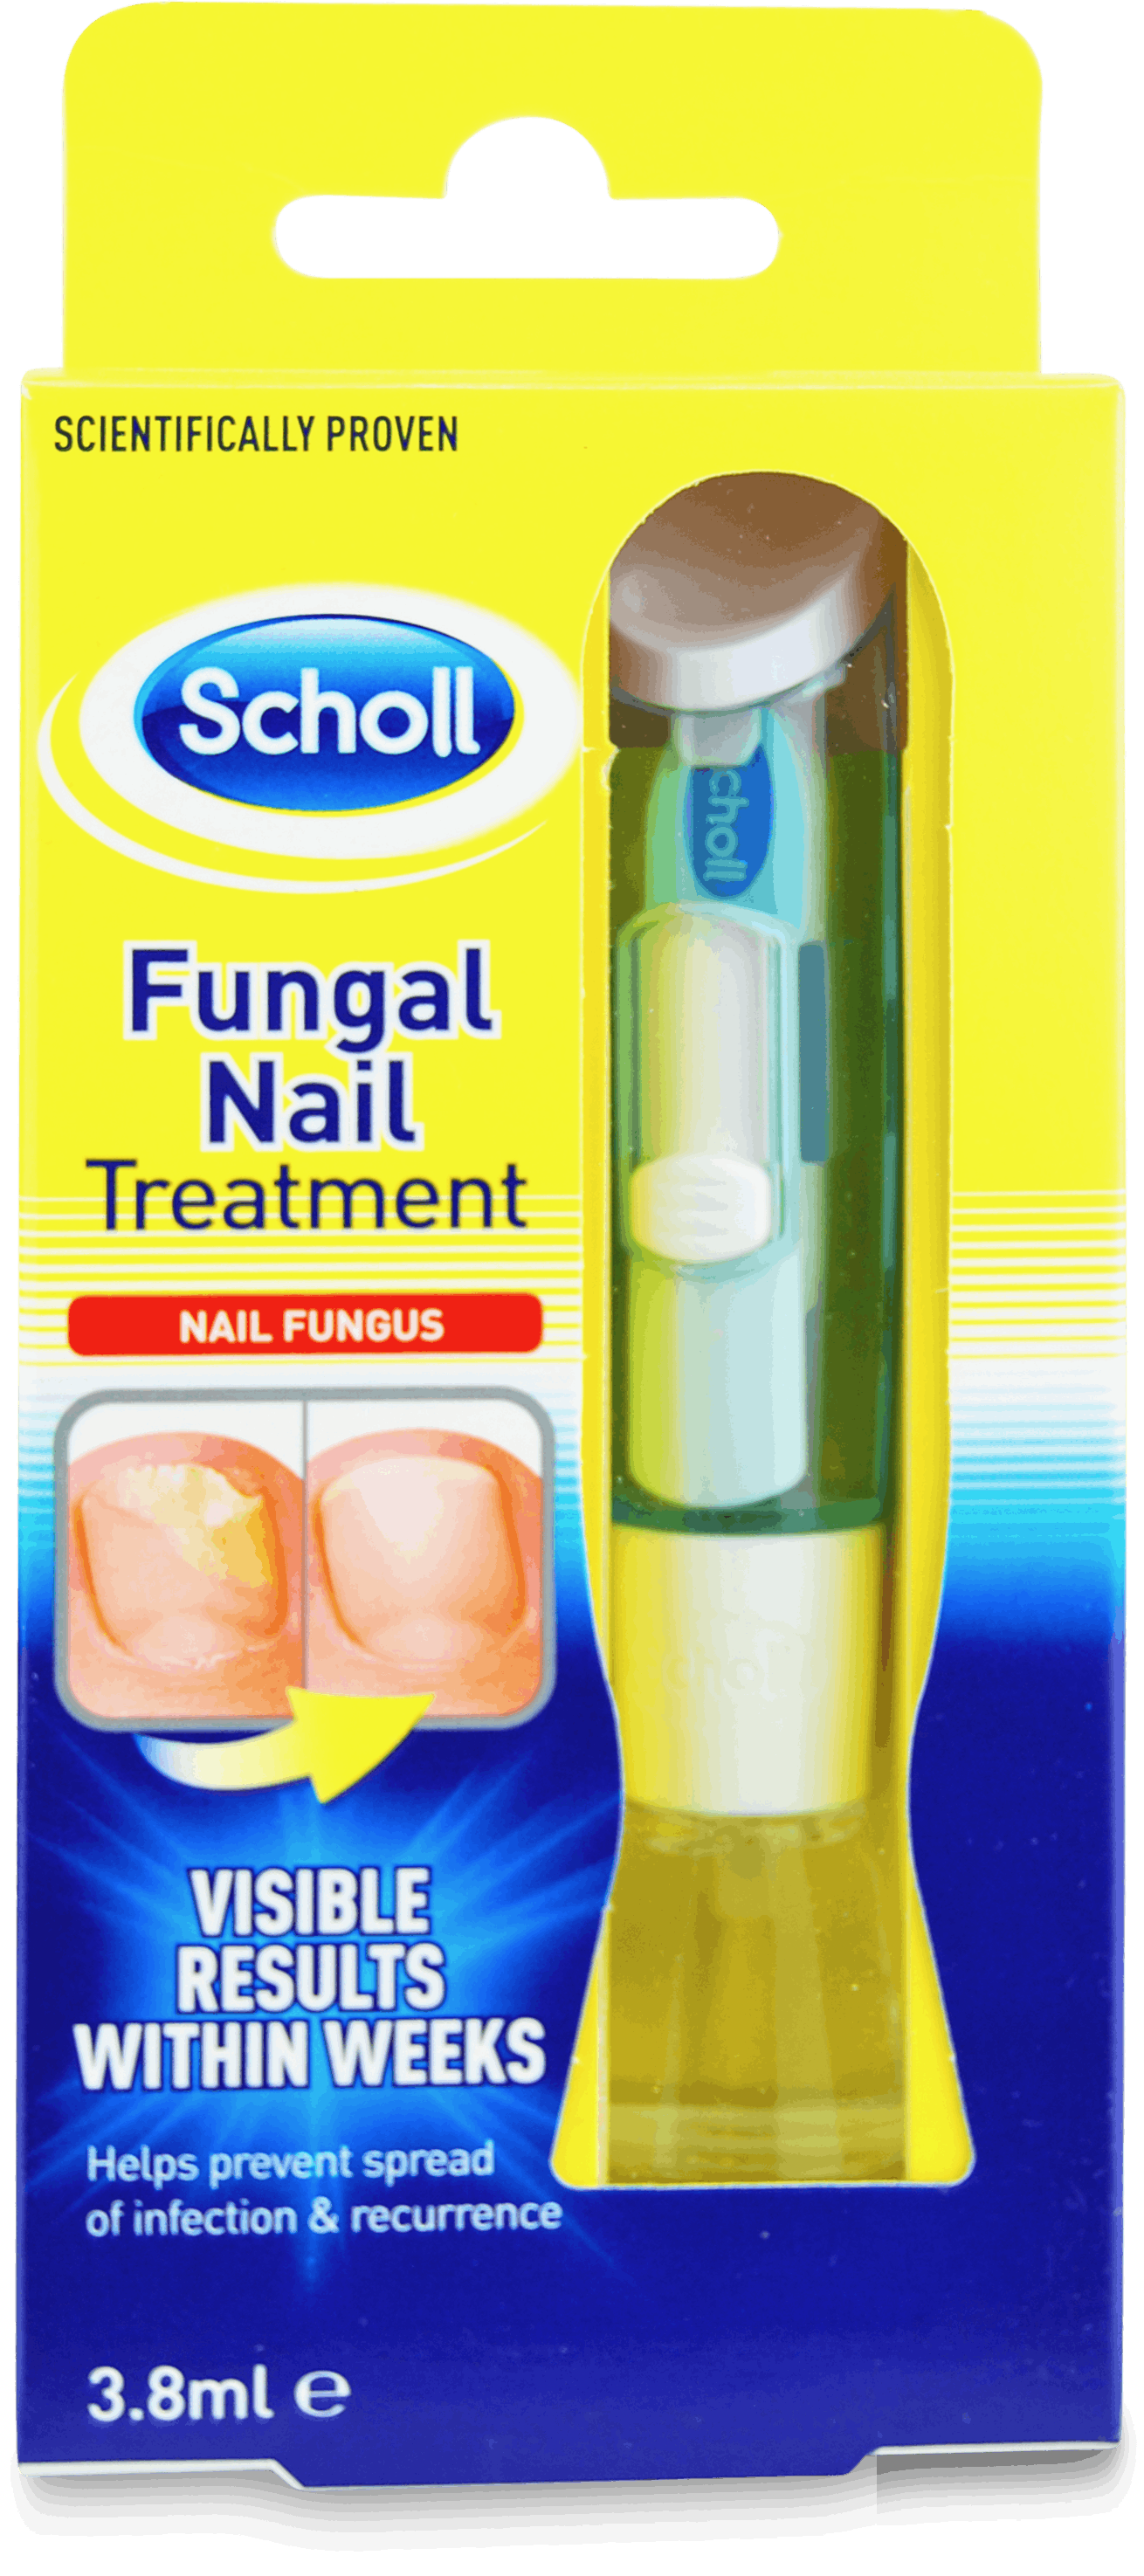 Scholl Fungal Nail Treatment - YouTube